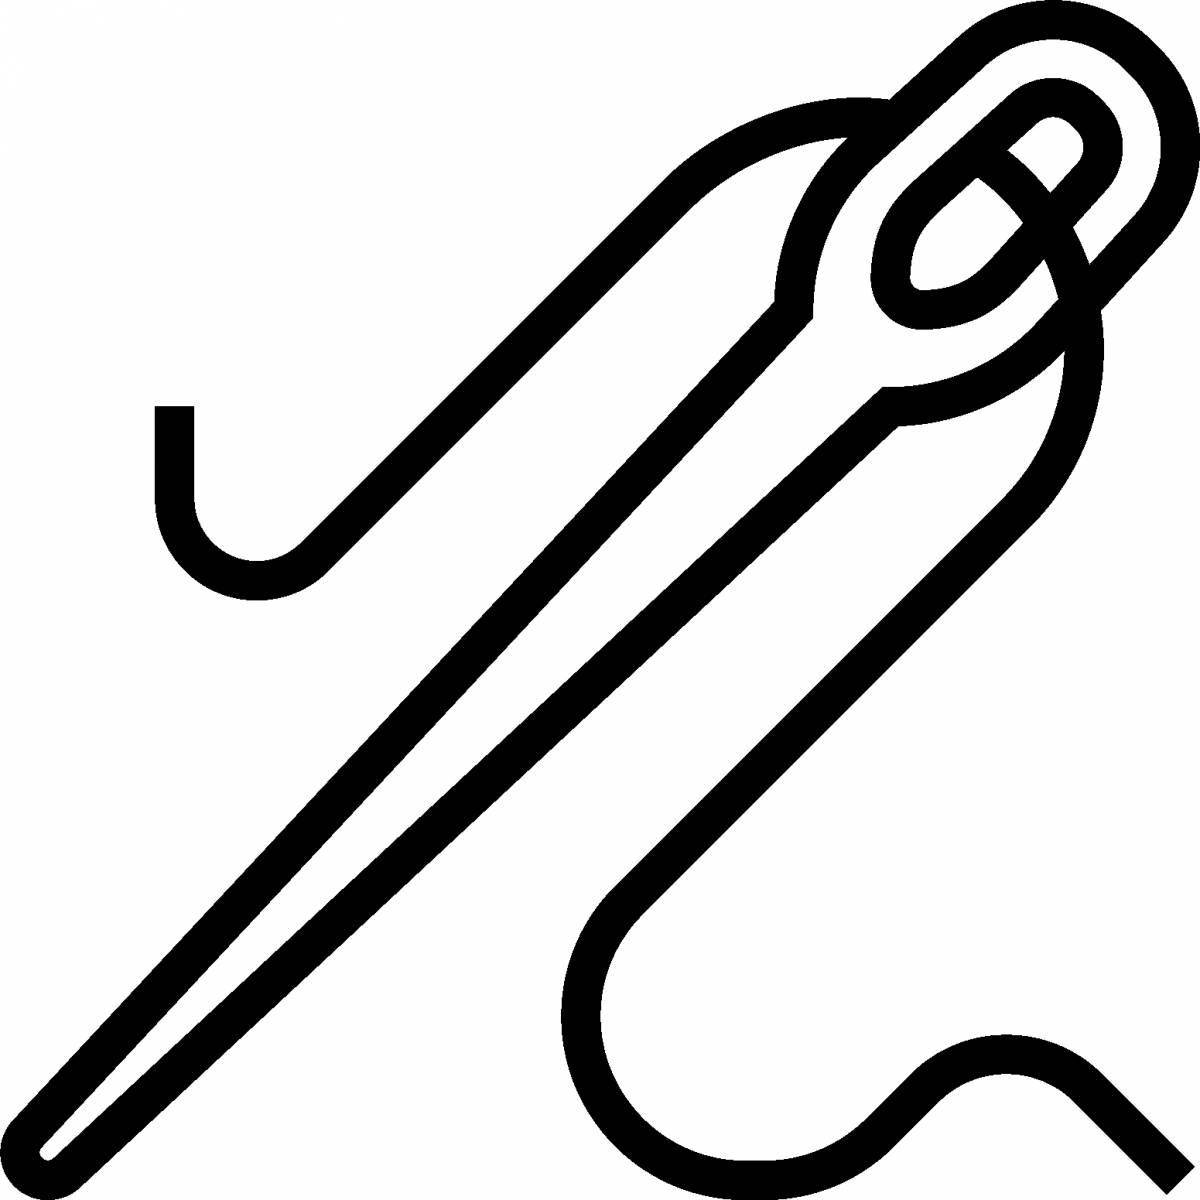 Interesting needle coloring page for kids